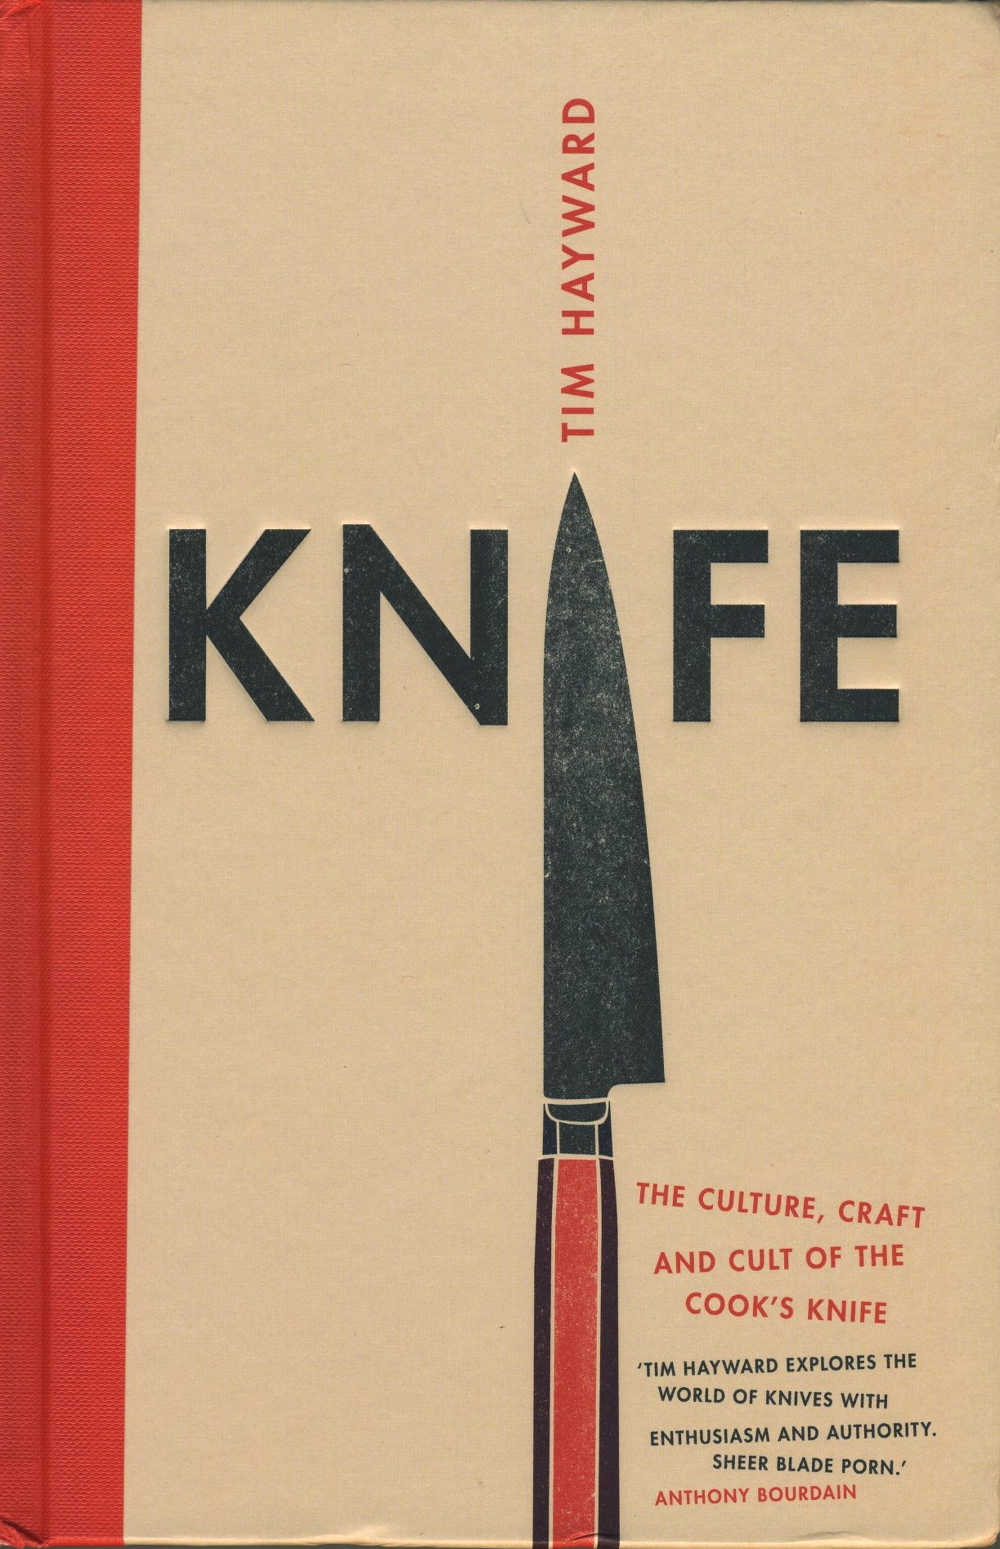 KNIFE, The Culture, Craft and Cult of the Cook’s Knife by Tim Hayward; photographs by Chris Terry (Quadrille, hardback; 224pp; £20.00)